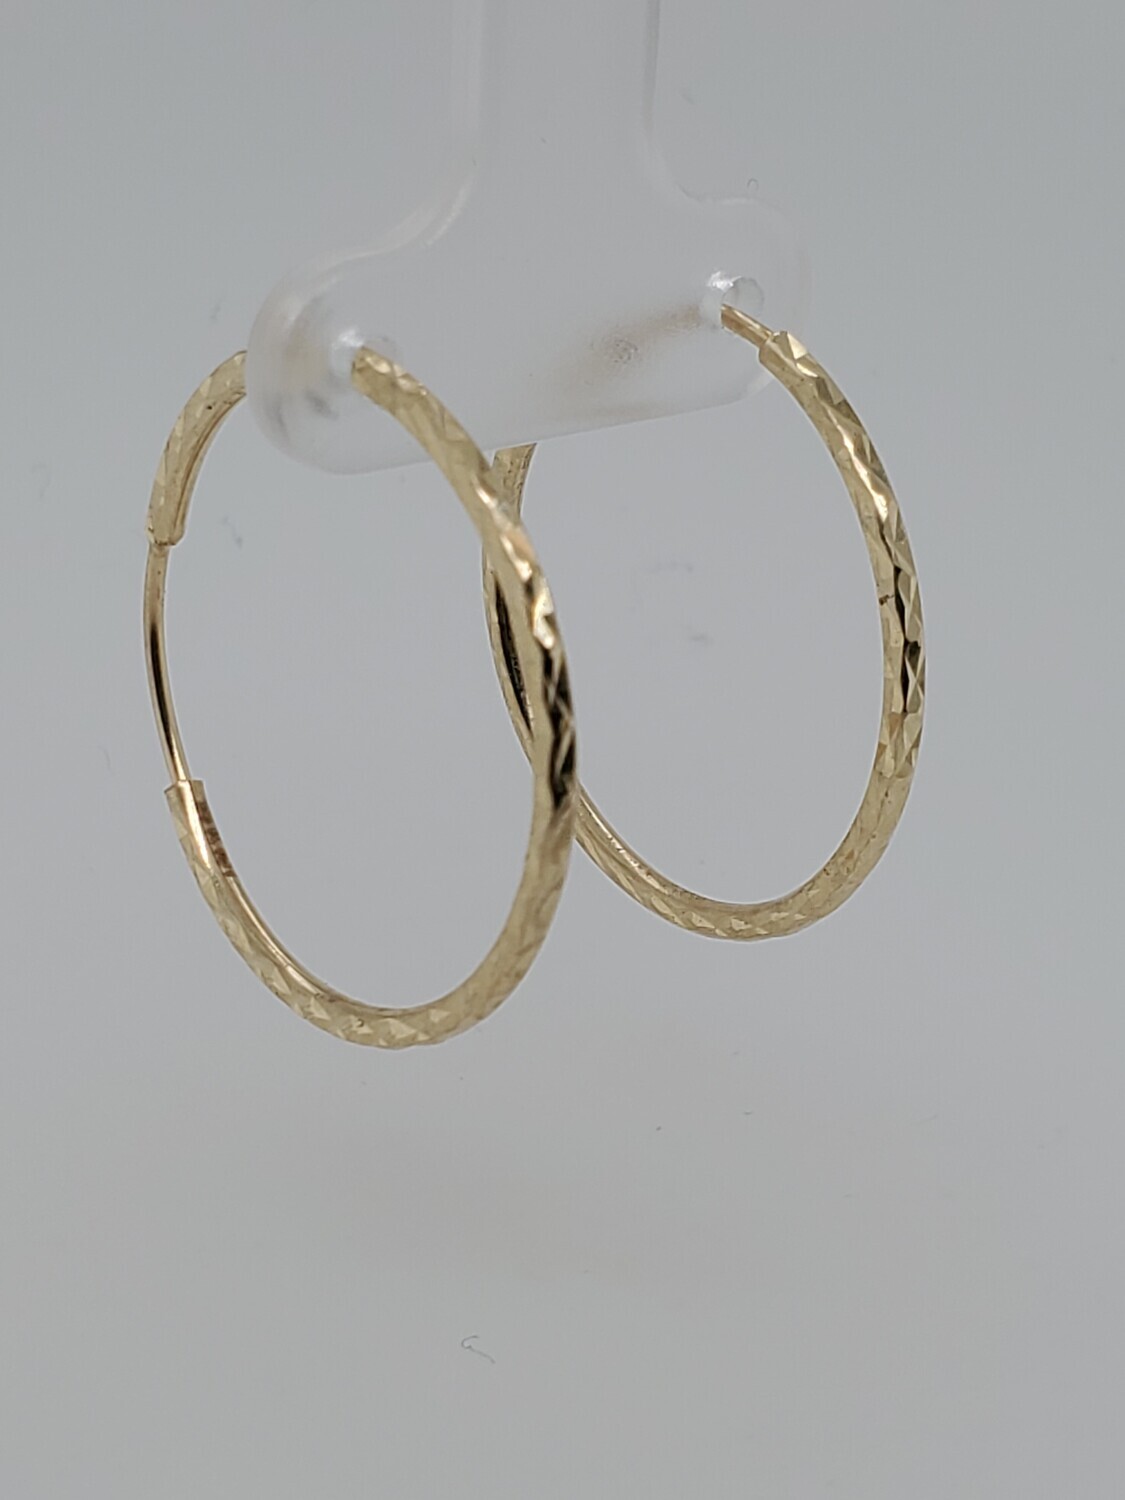 BRAND NEW!! 14KT THIN HOLLOW HOOP EARRINGS INVENTORY # I-18319 75TH AVE